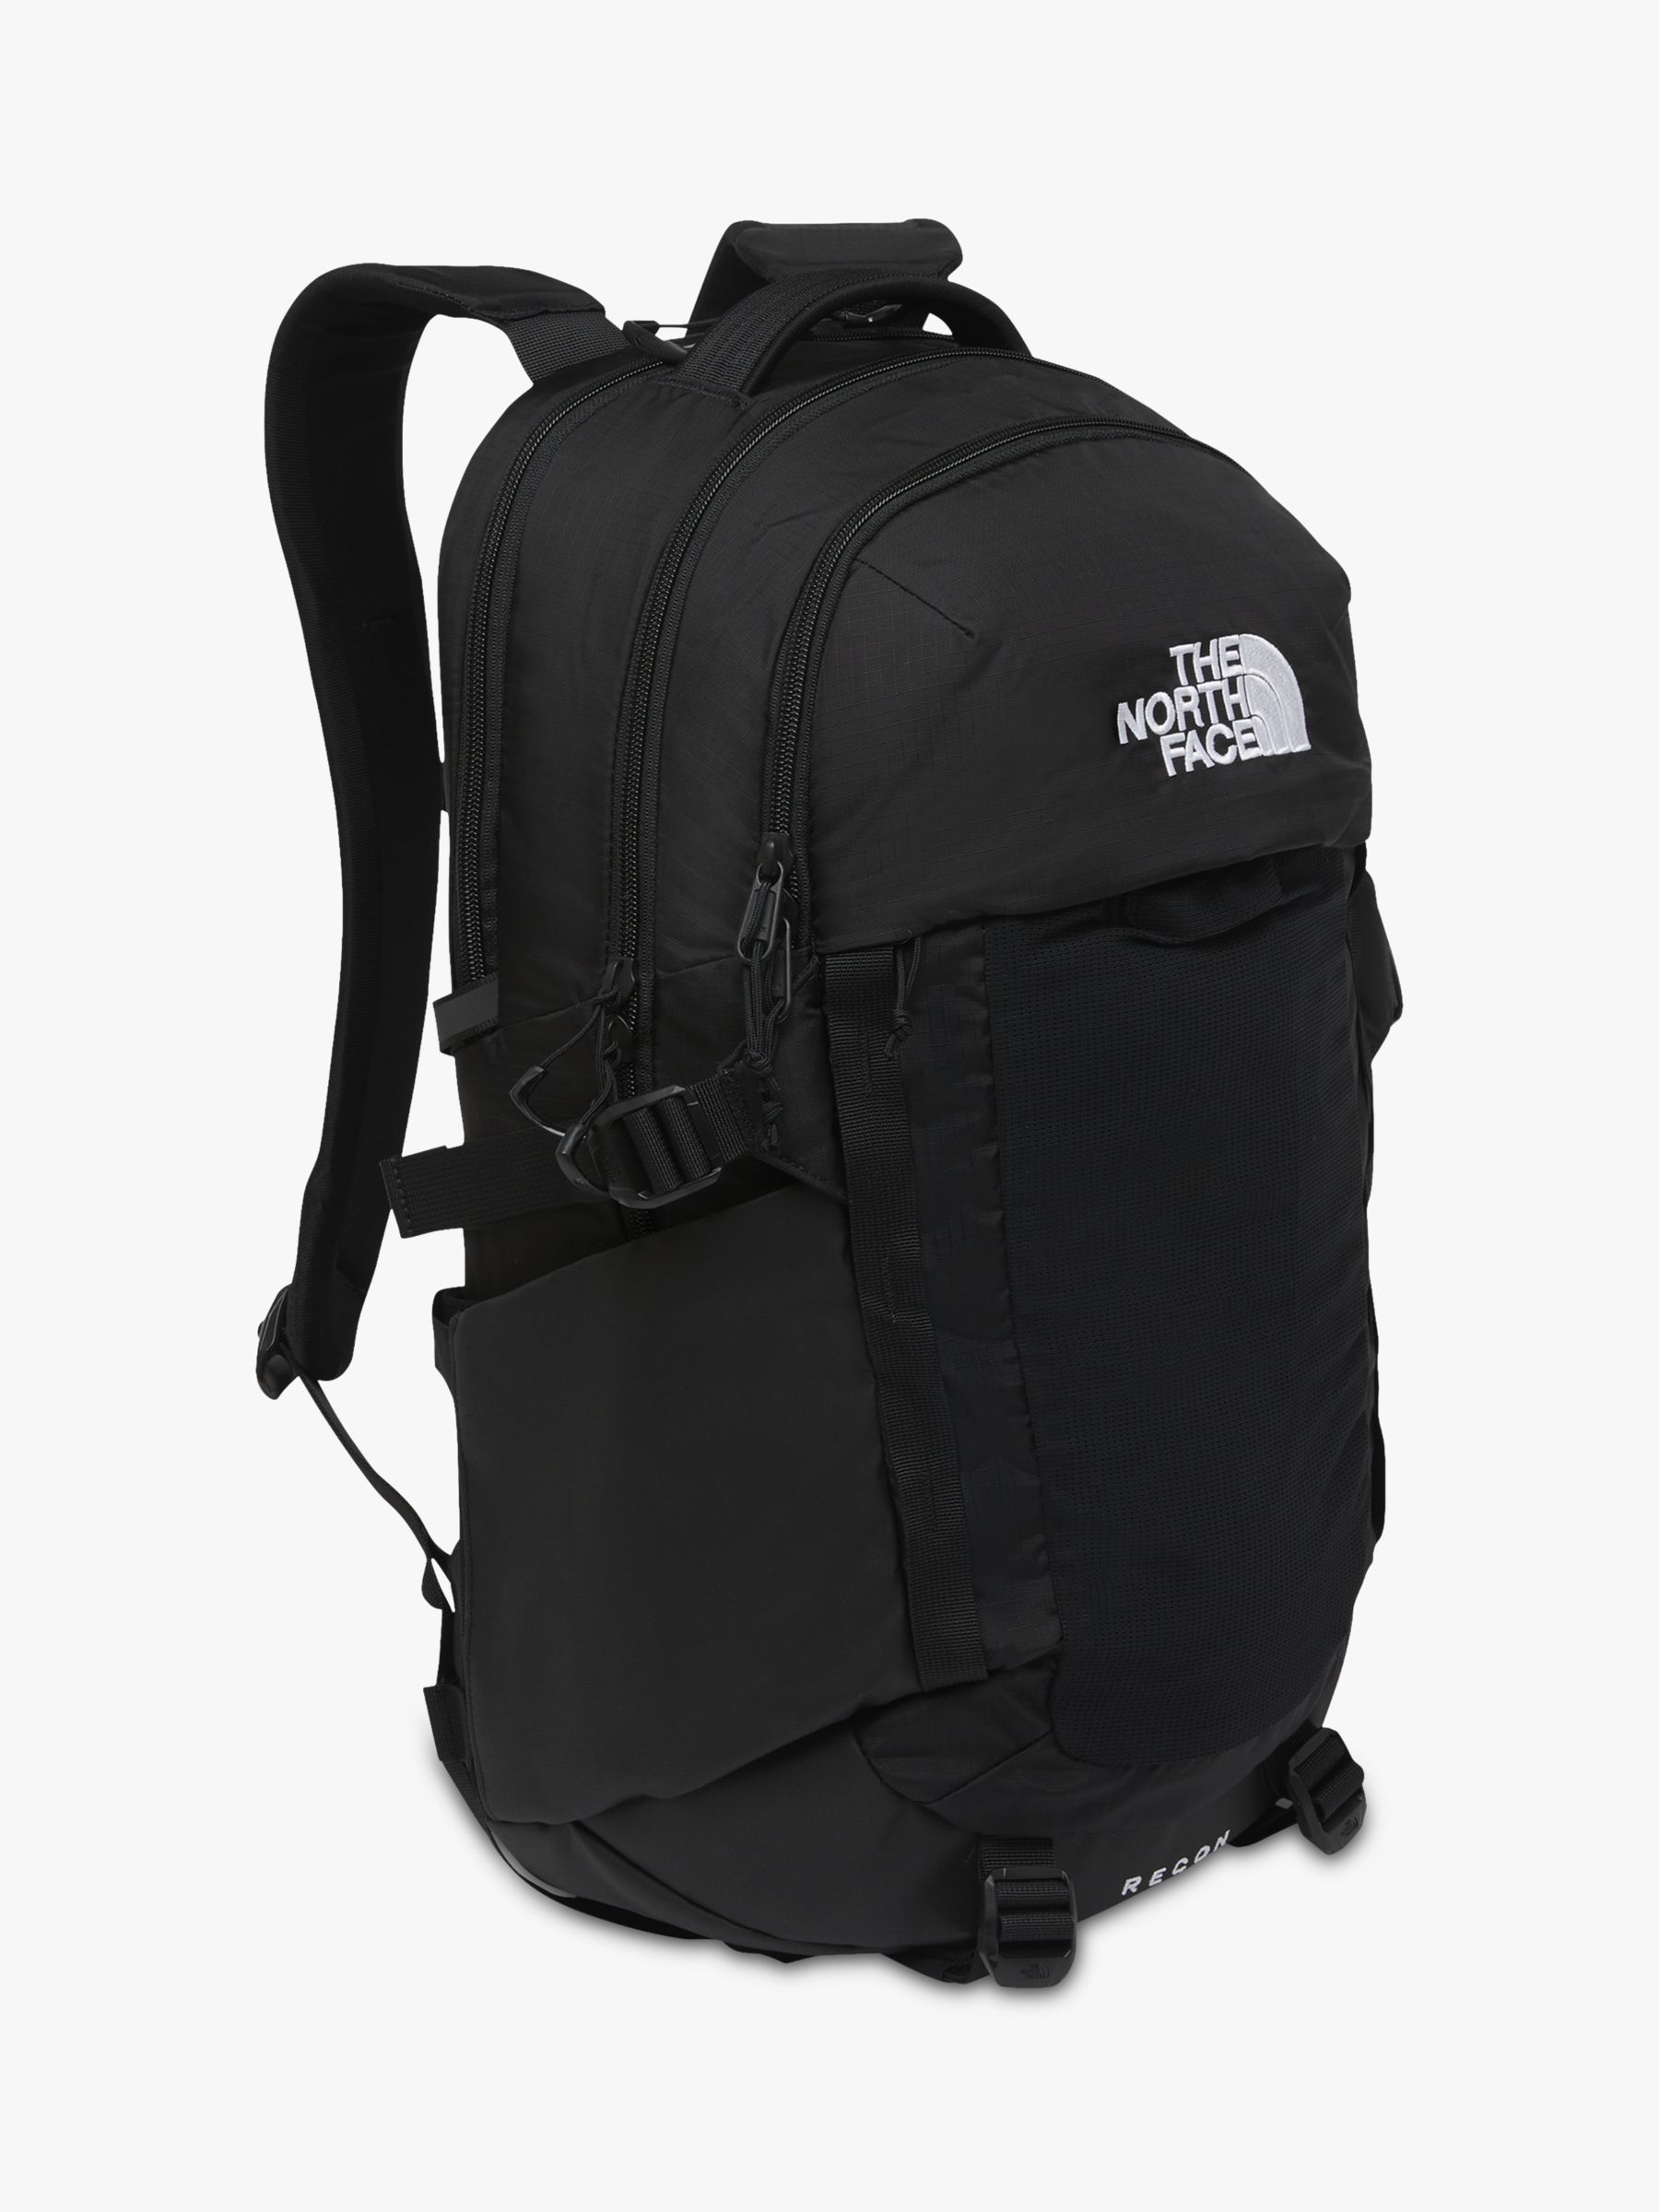 The North Face Recon Day Backpack, Black